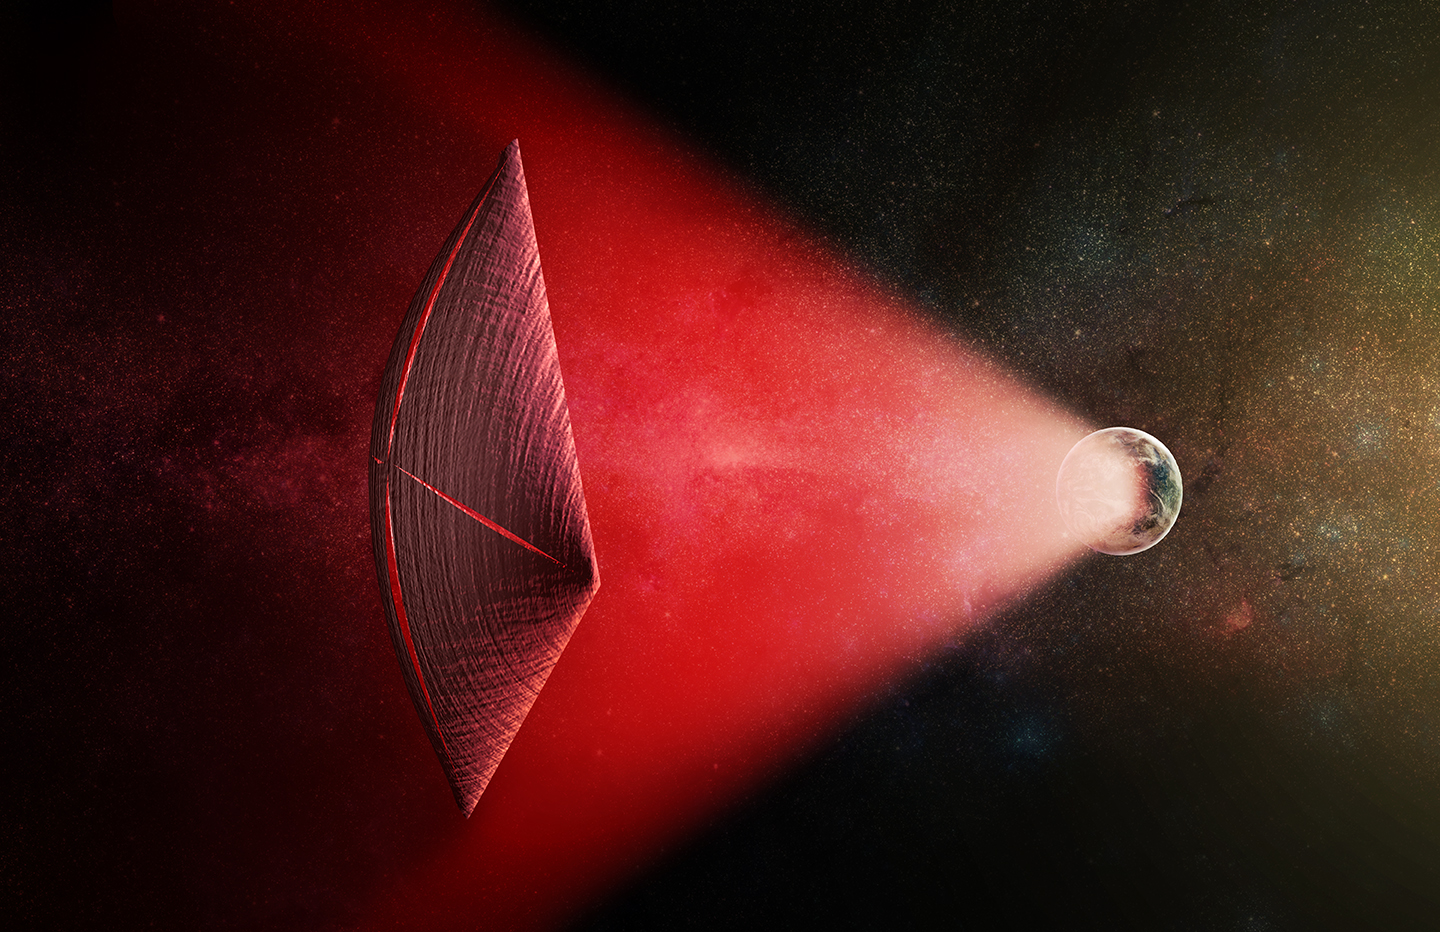 An artist&#039;s illustration of a light-sail powered by a radio beam (red) generated on the surface of a planet. The leakage from such beams as they sweep across the sky would appear as Fast Radio Bursts (FRBs), similar to the new population of sources that was discovered recently at cosmological distances.